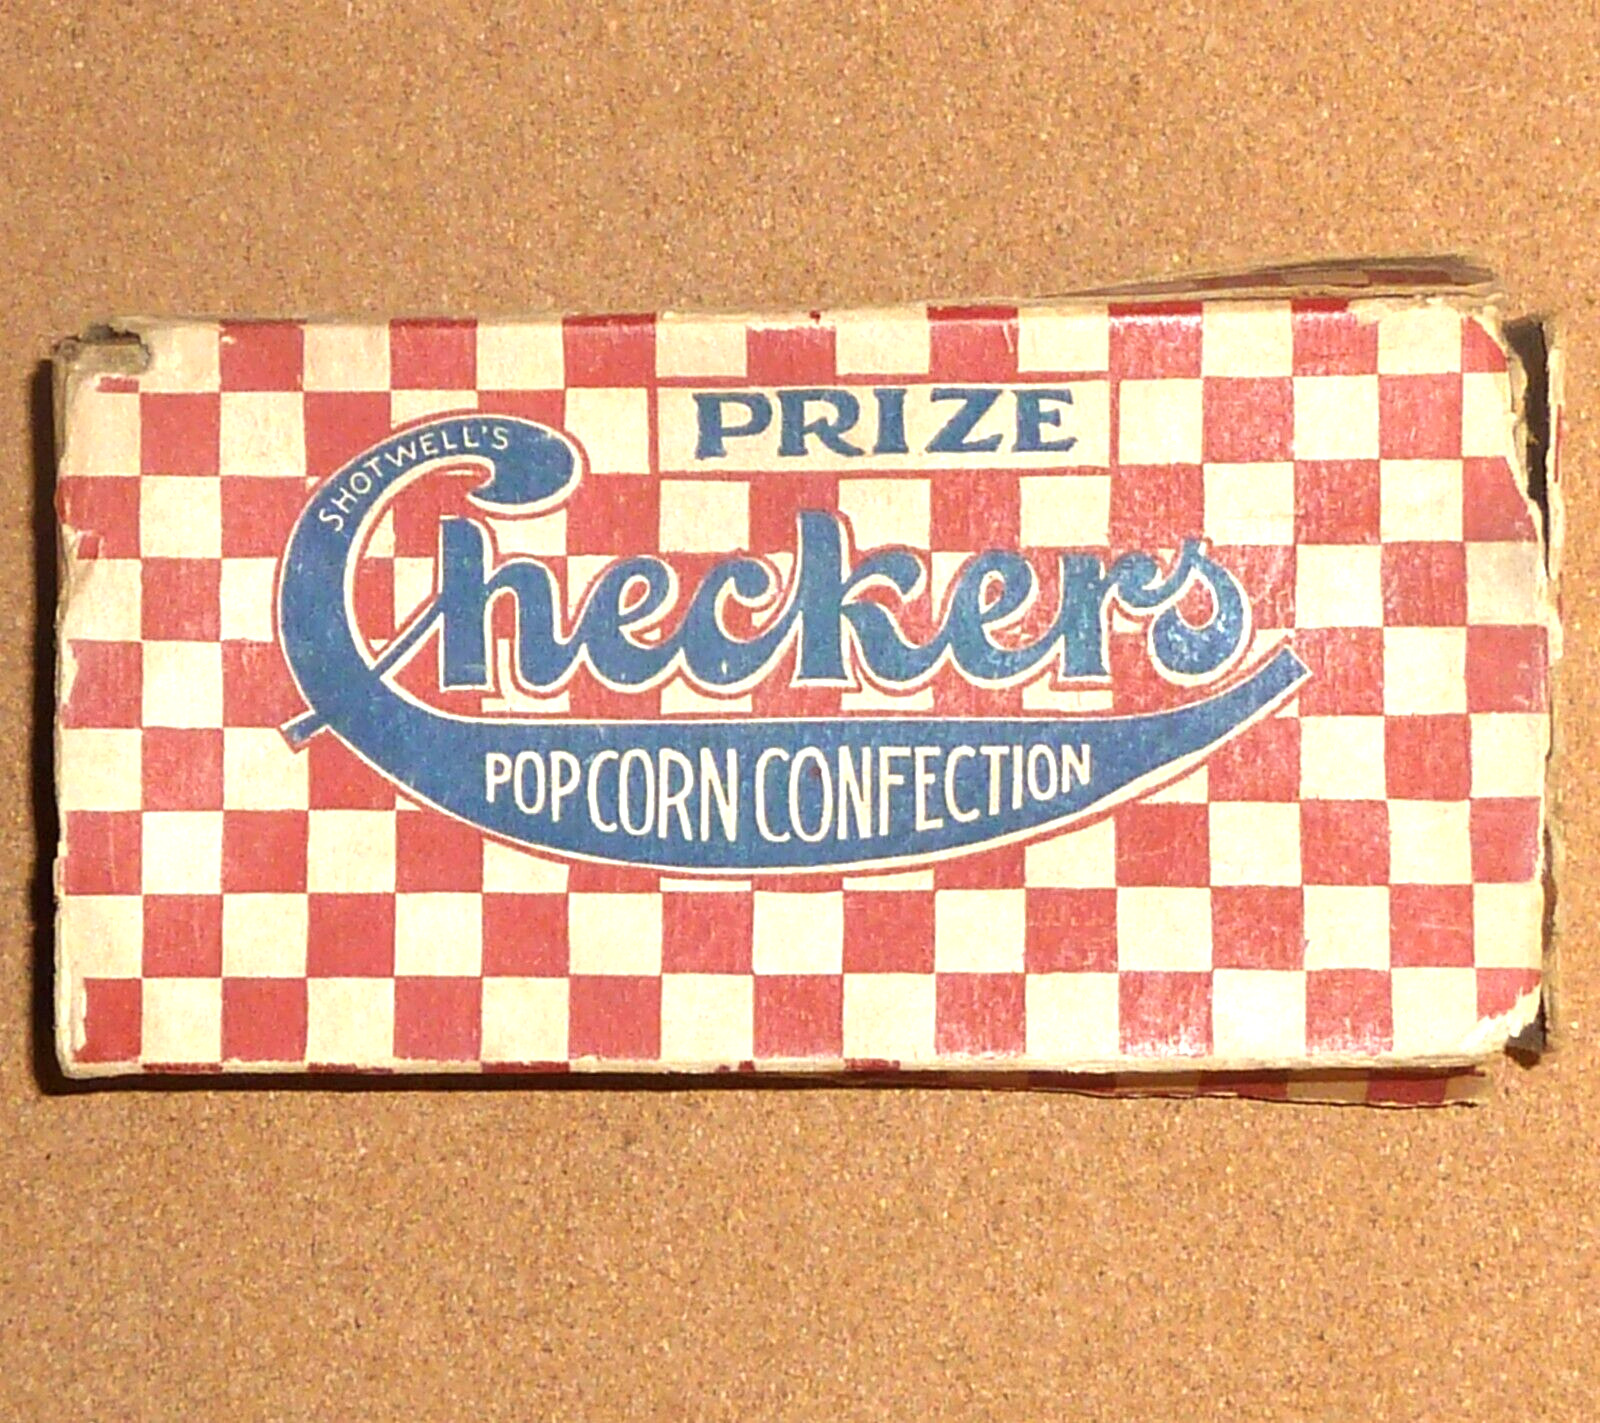 Early Antique Shotwell\'s Checkers Popcorn Box.  Competitor of Cracker Jack 2 oz.